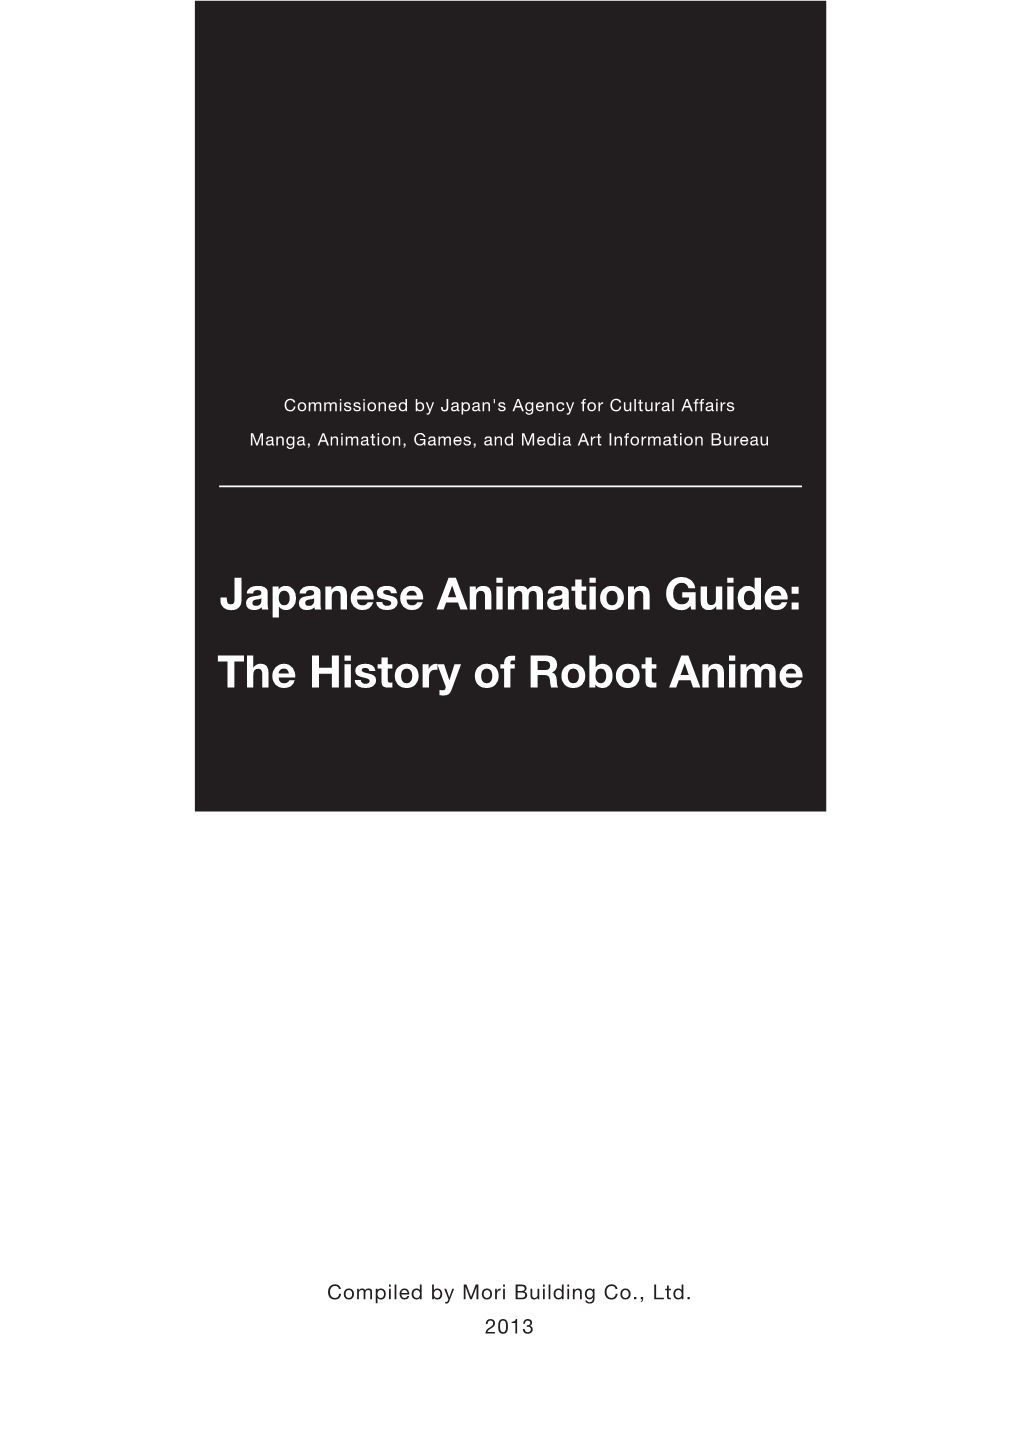 Japanese Animation Guide: the History of Robot Anime